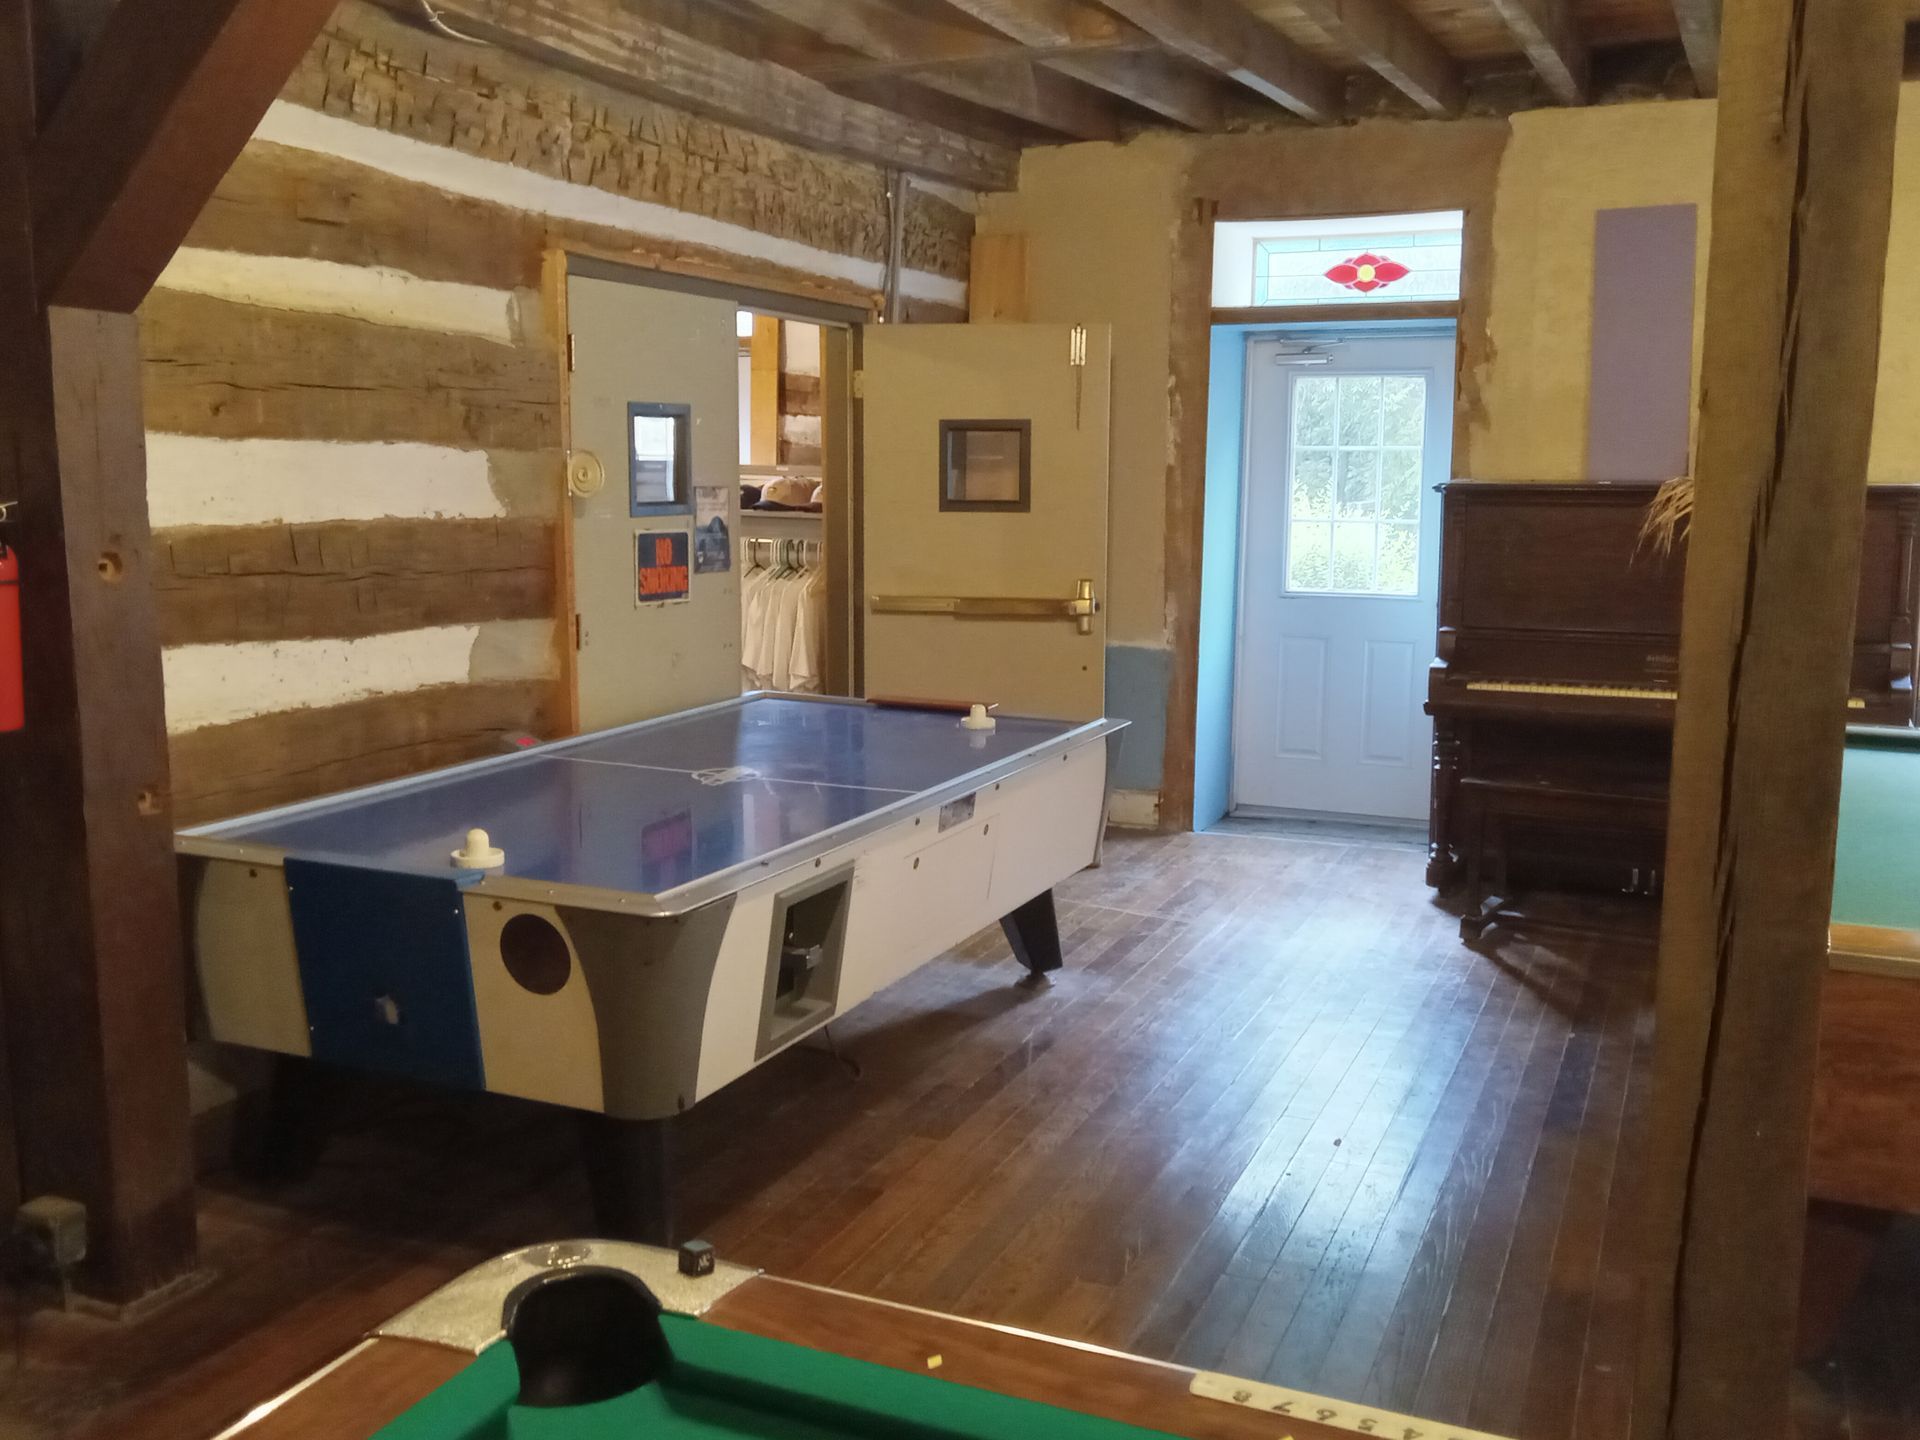 A pool table and air hockey table in a room